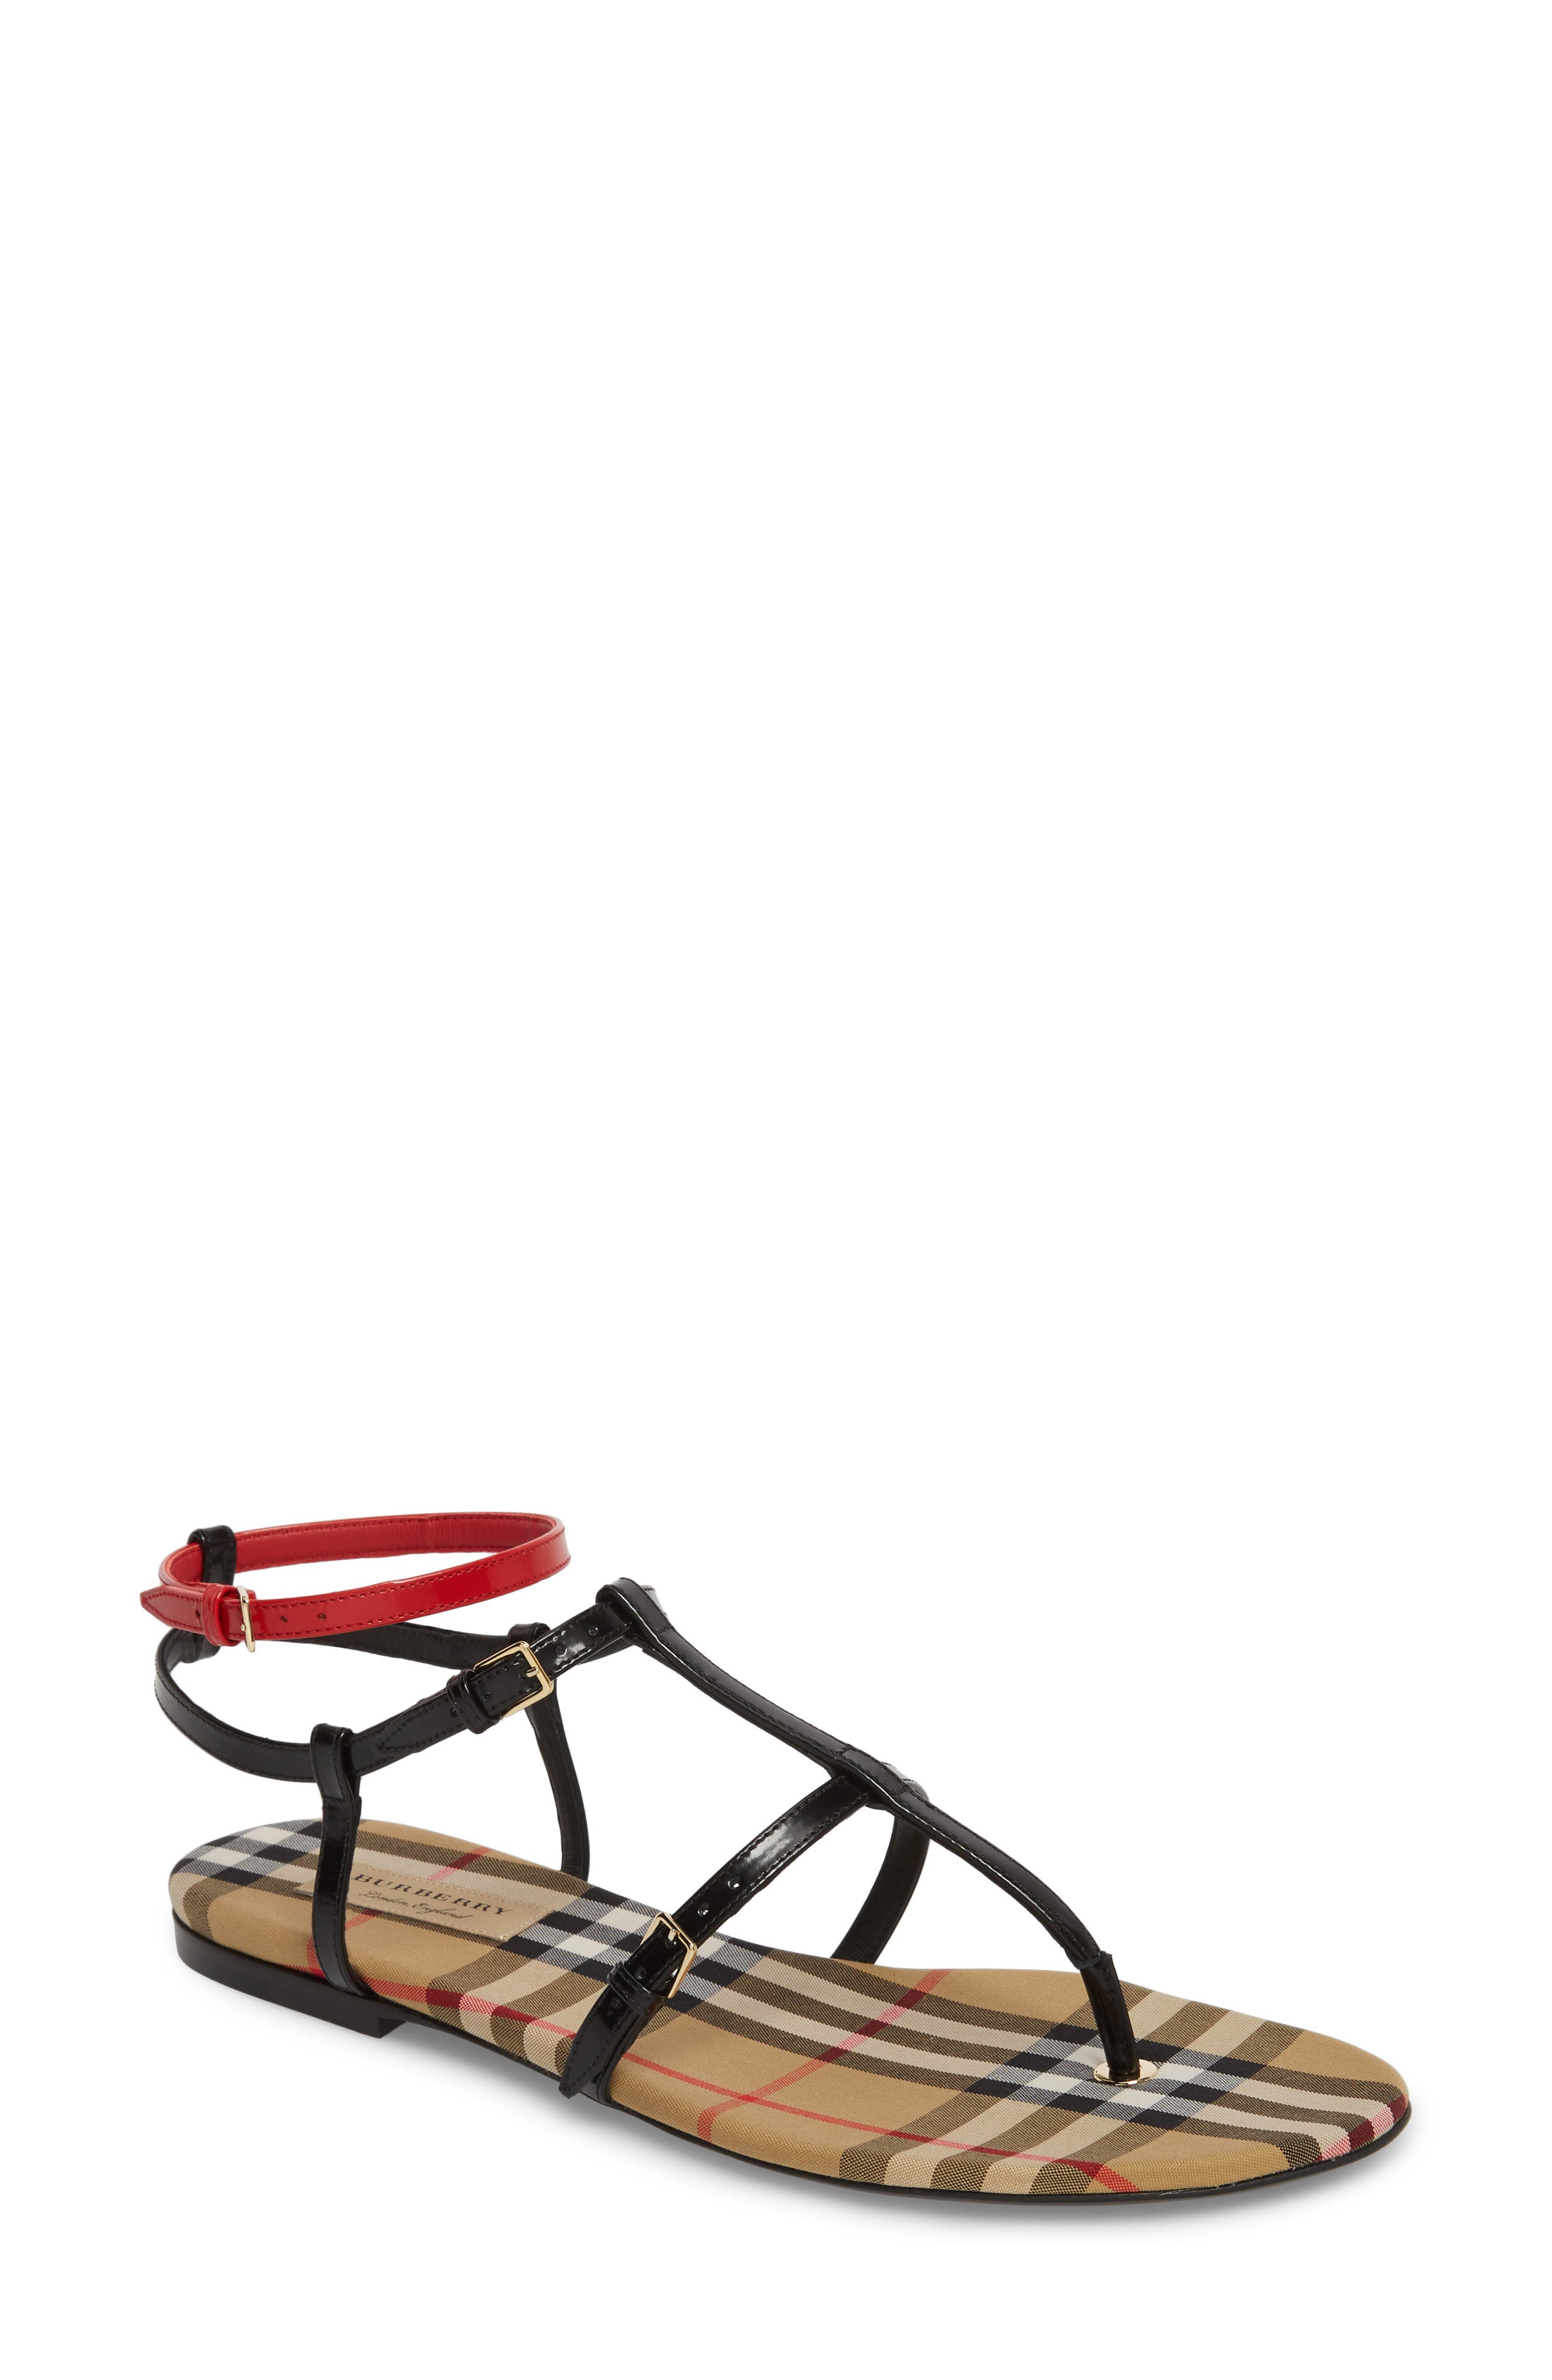 burberry sandals mens silver